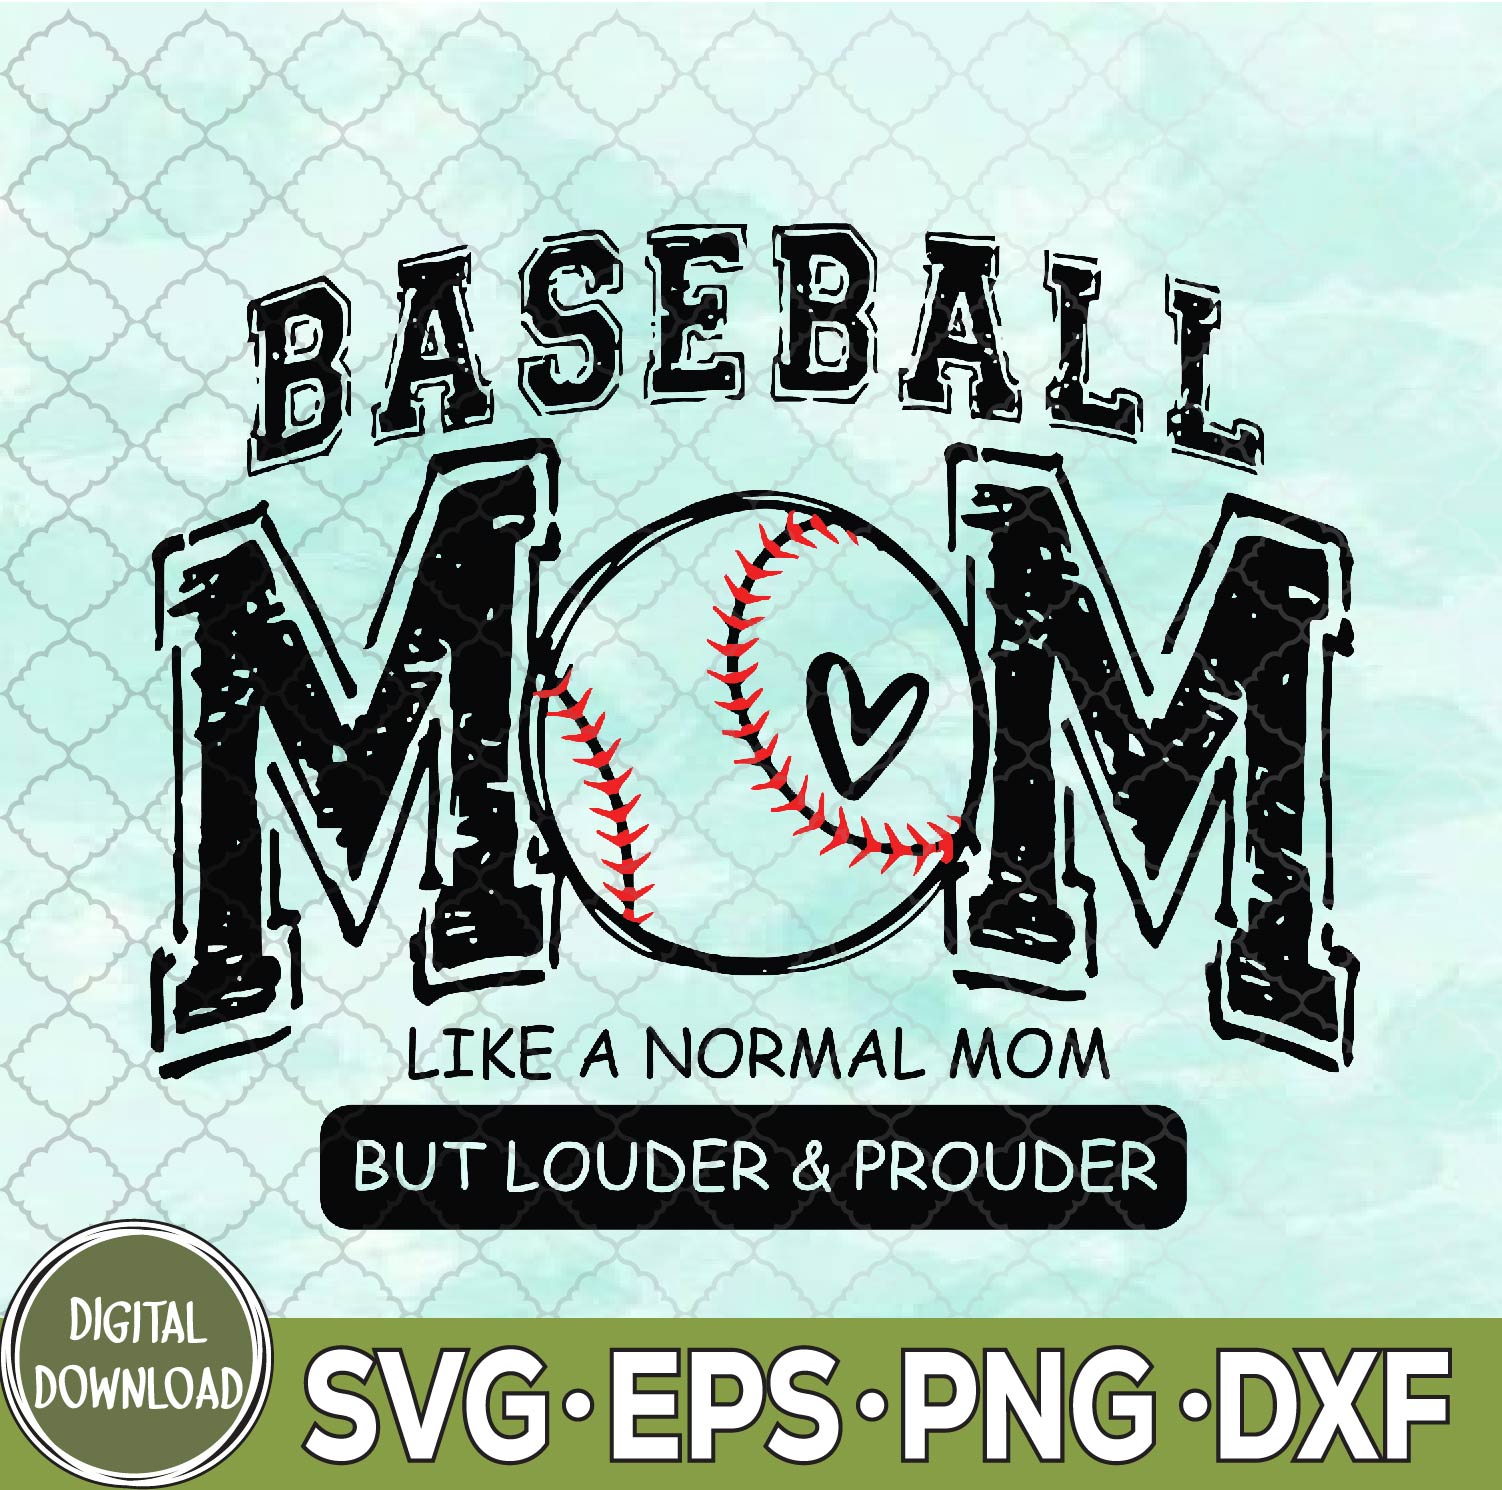 WTMNEW9file 09 118 Baseball Mom Like A Normal Mom Game Day Baseball Softball svg, Baseball Mom svg, Game Day svg, Svg, Eps, Png, Dxf